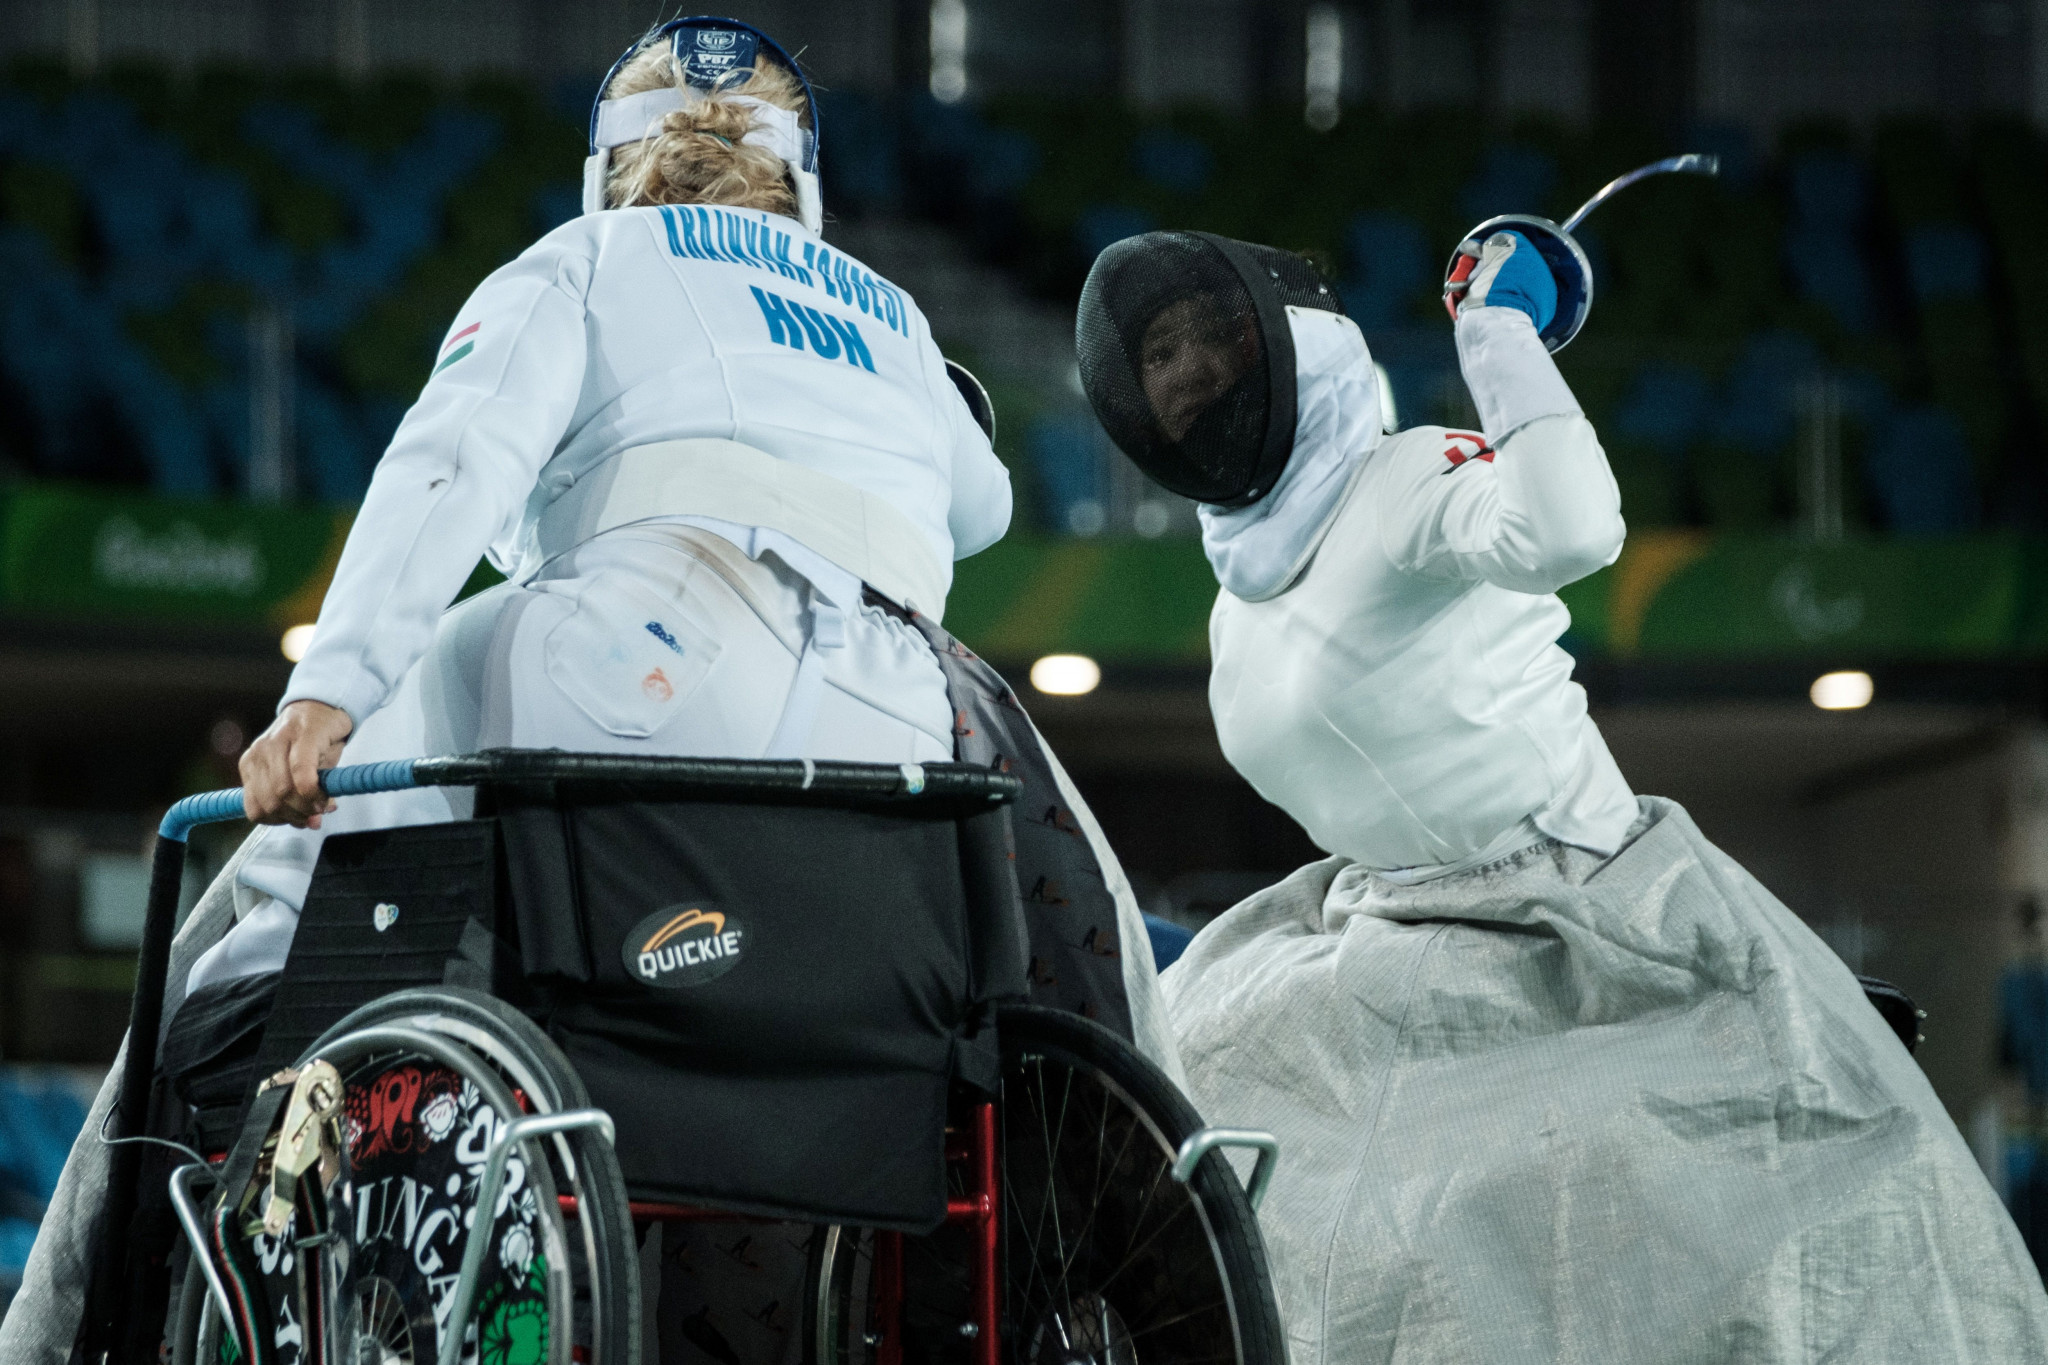 Hungarian world champion wins wheelchair fencing gold at IWAS World Games